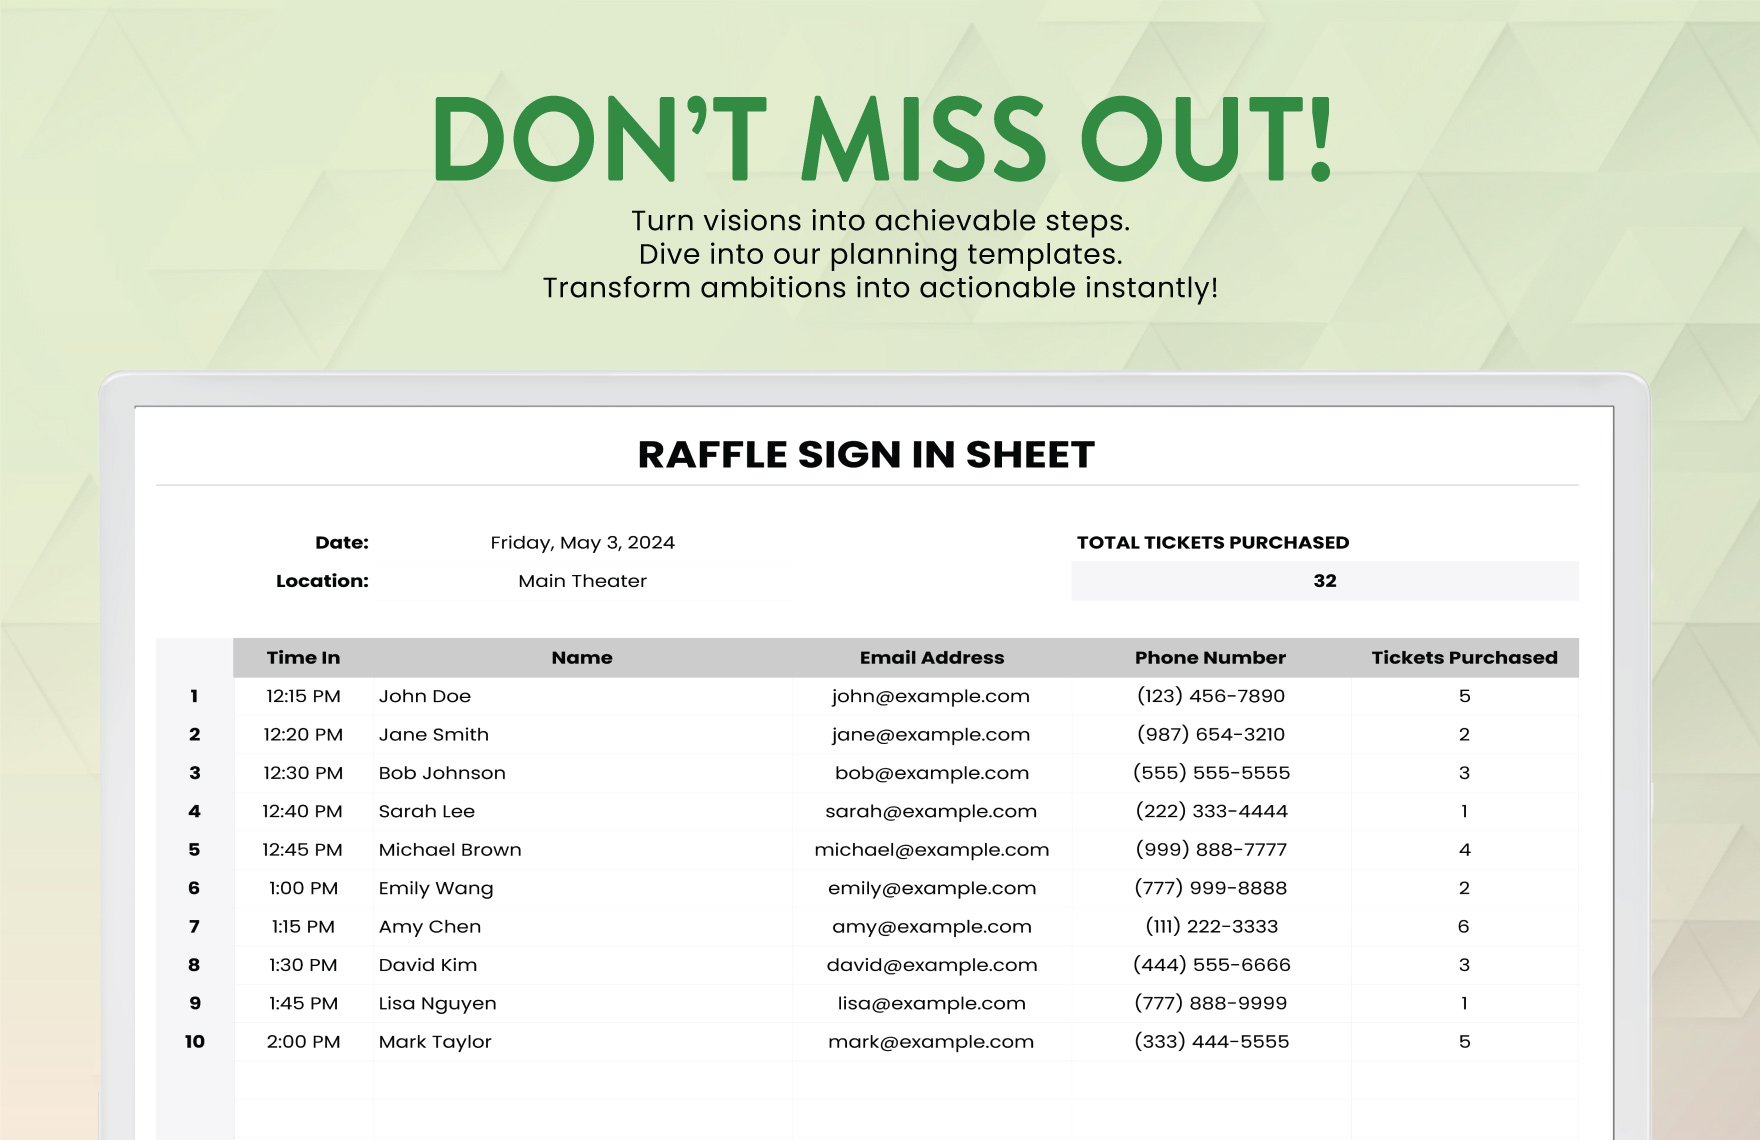 Raffle Sign in Sheet Template